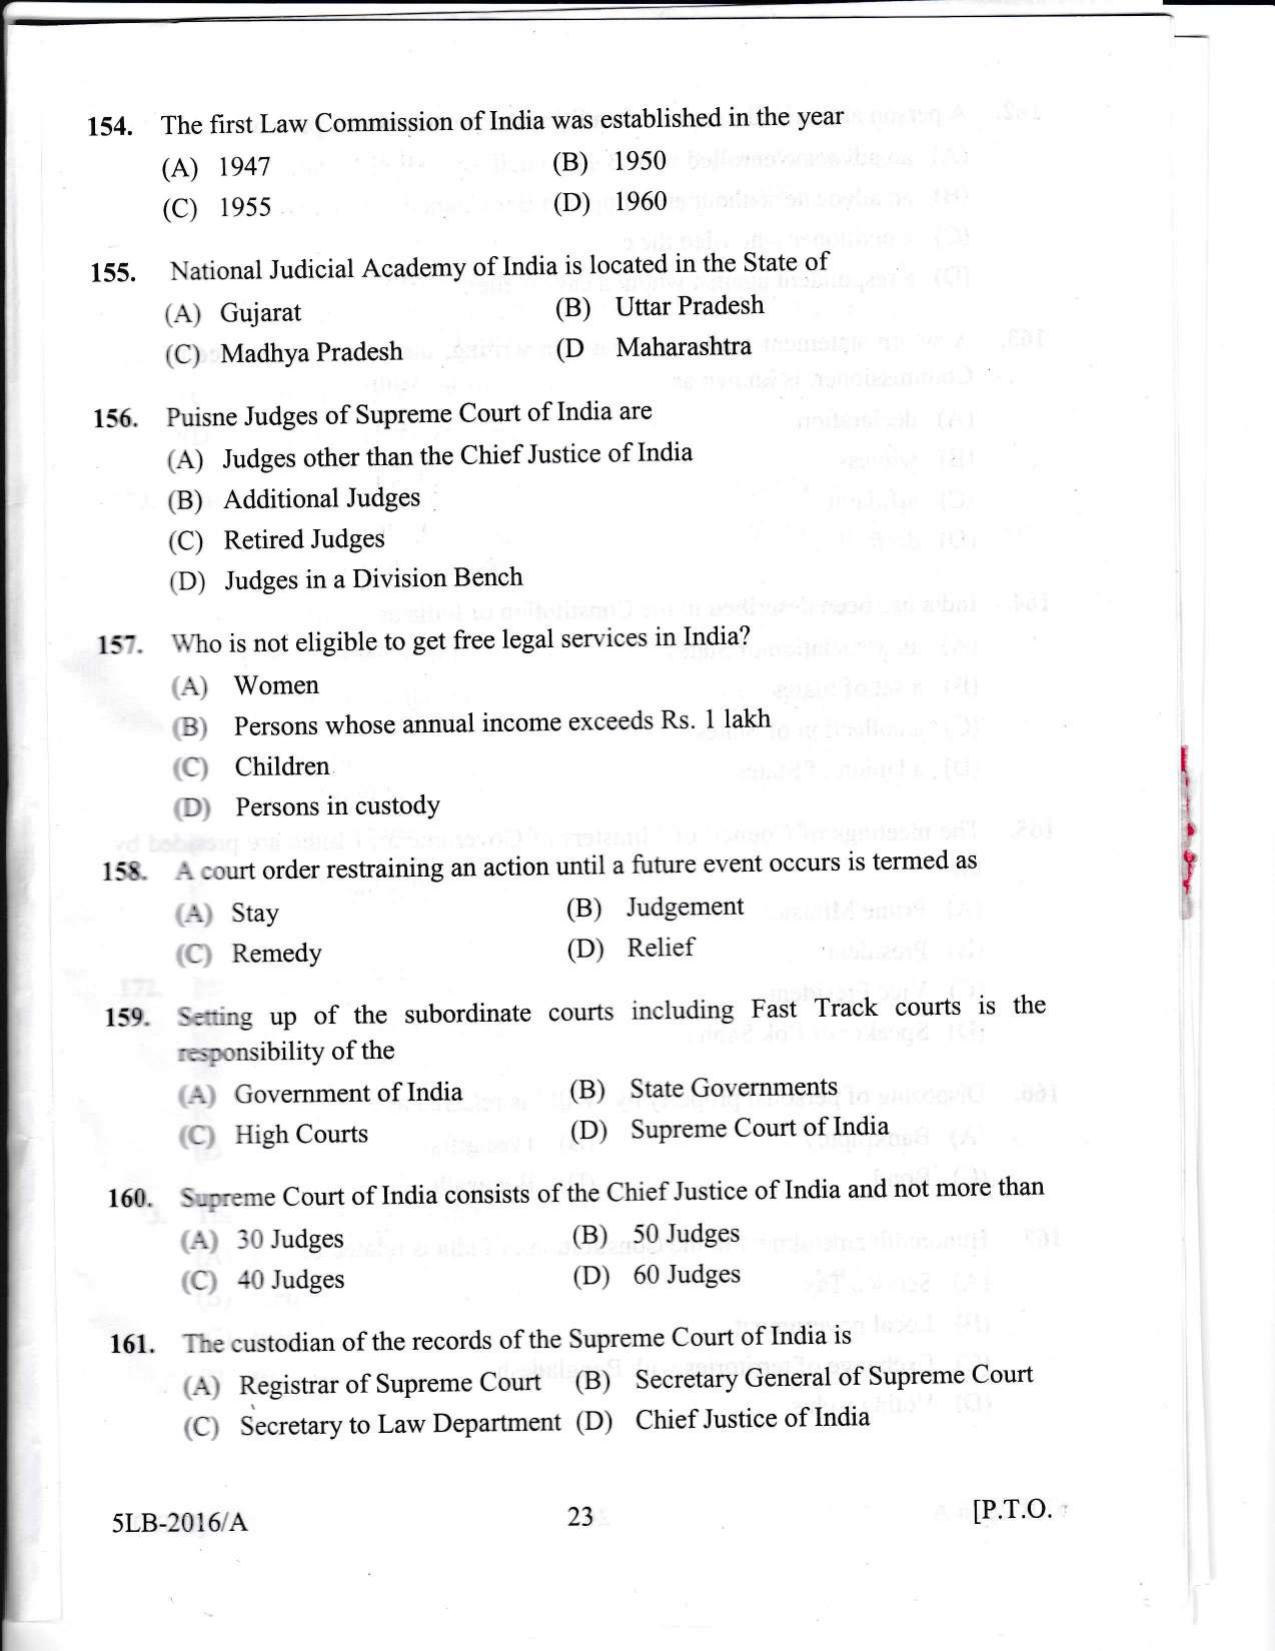 KLEE 5 Year LLB Exam 2016 Question Paper - Page 23